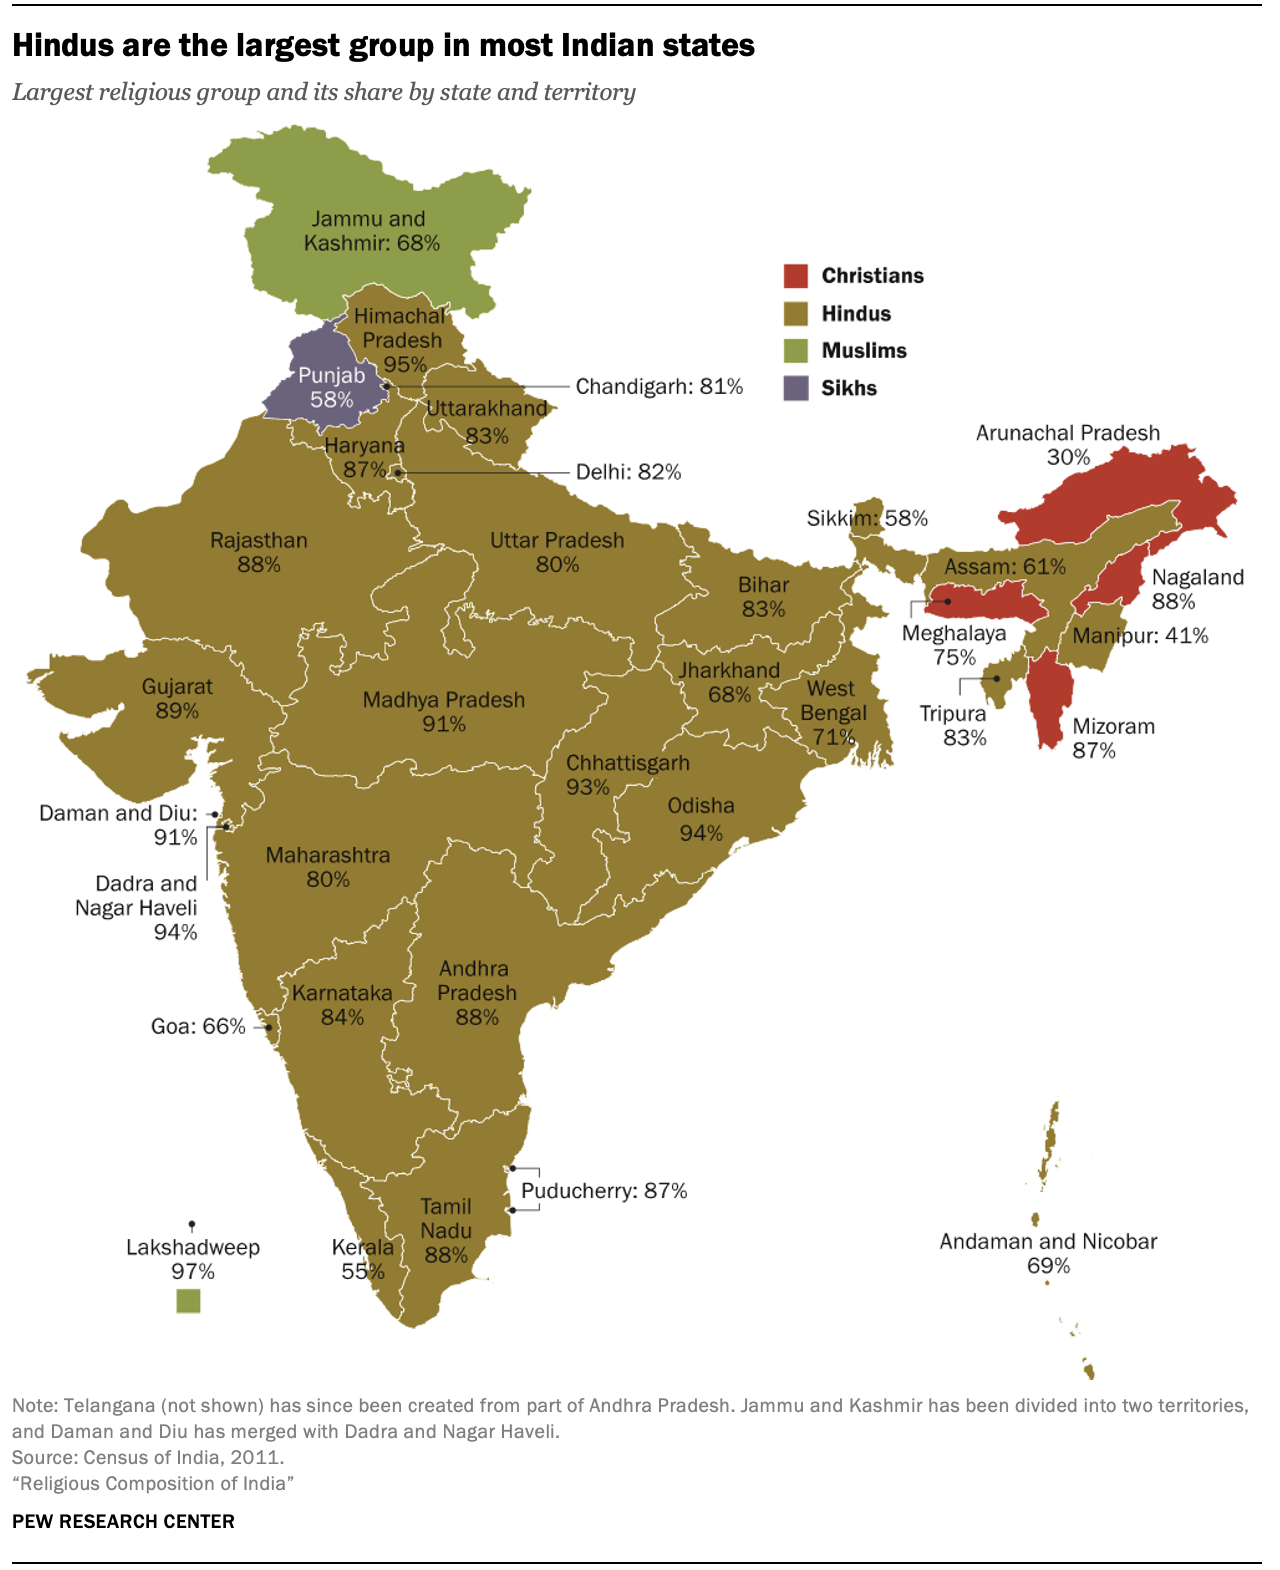 Hindus are the largest group in most Indian states